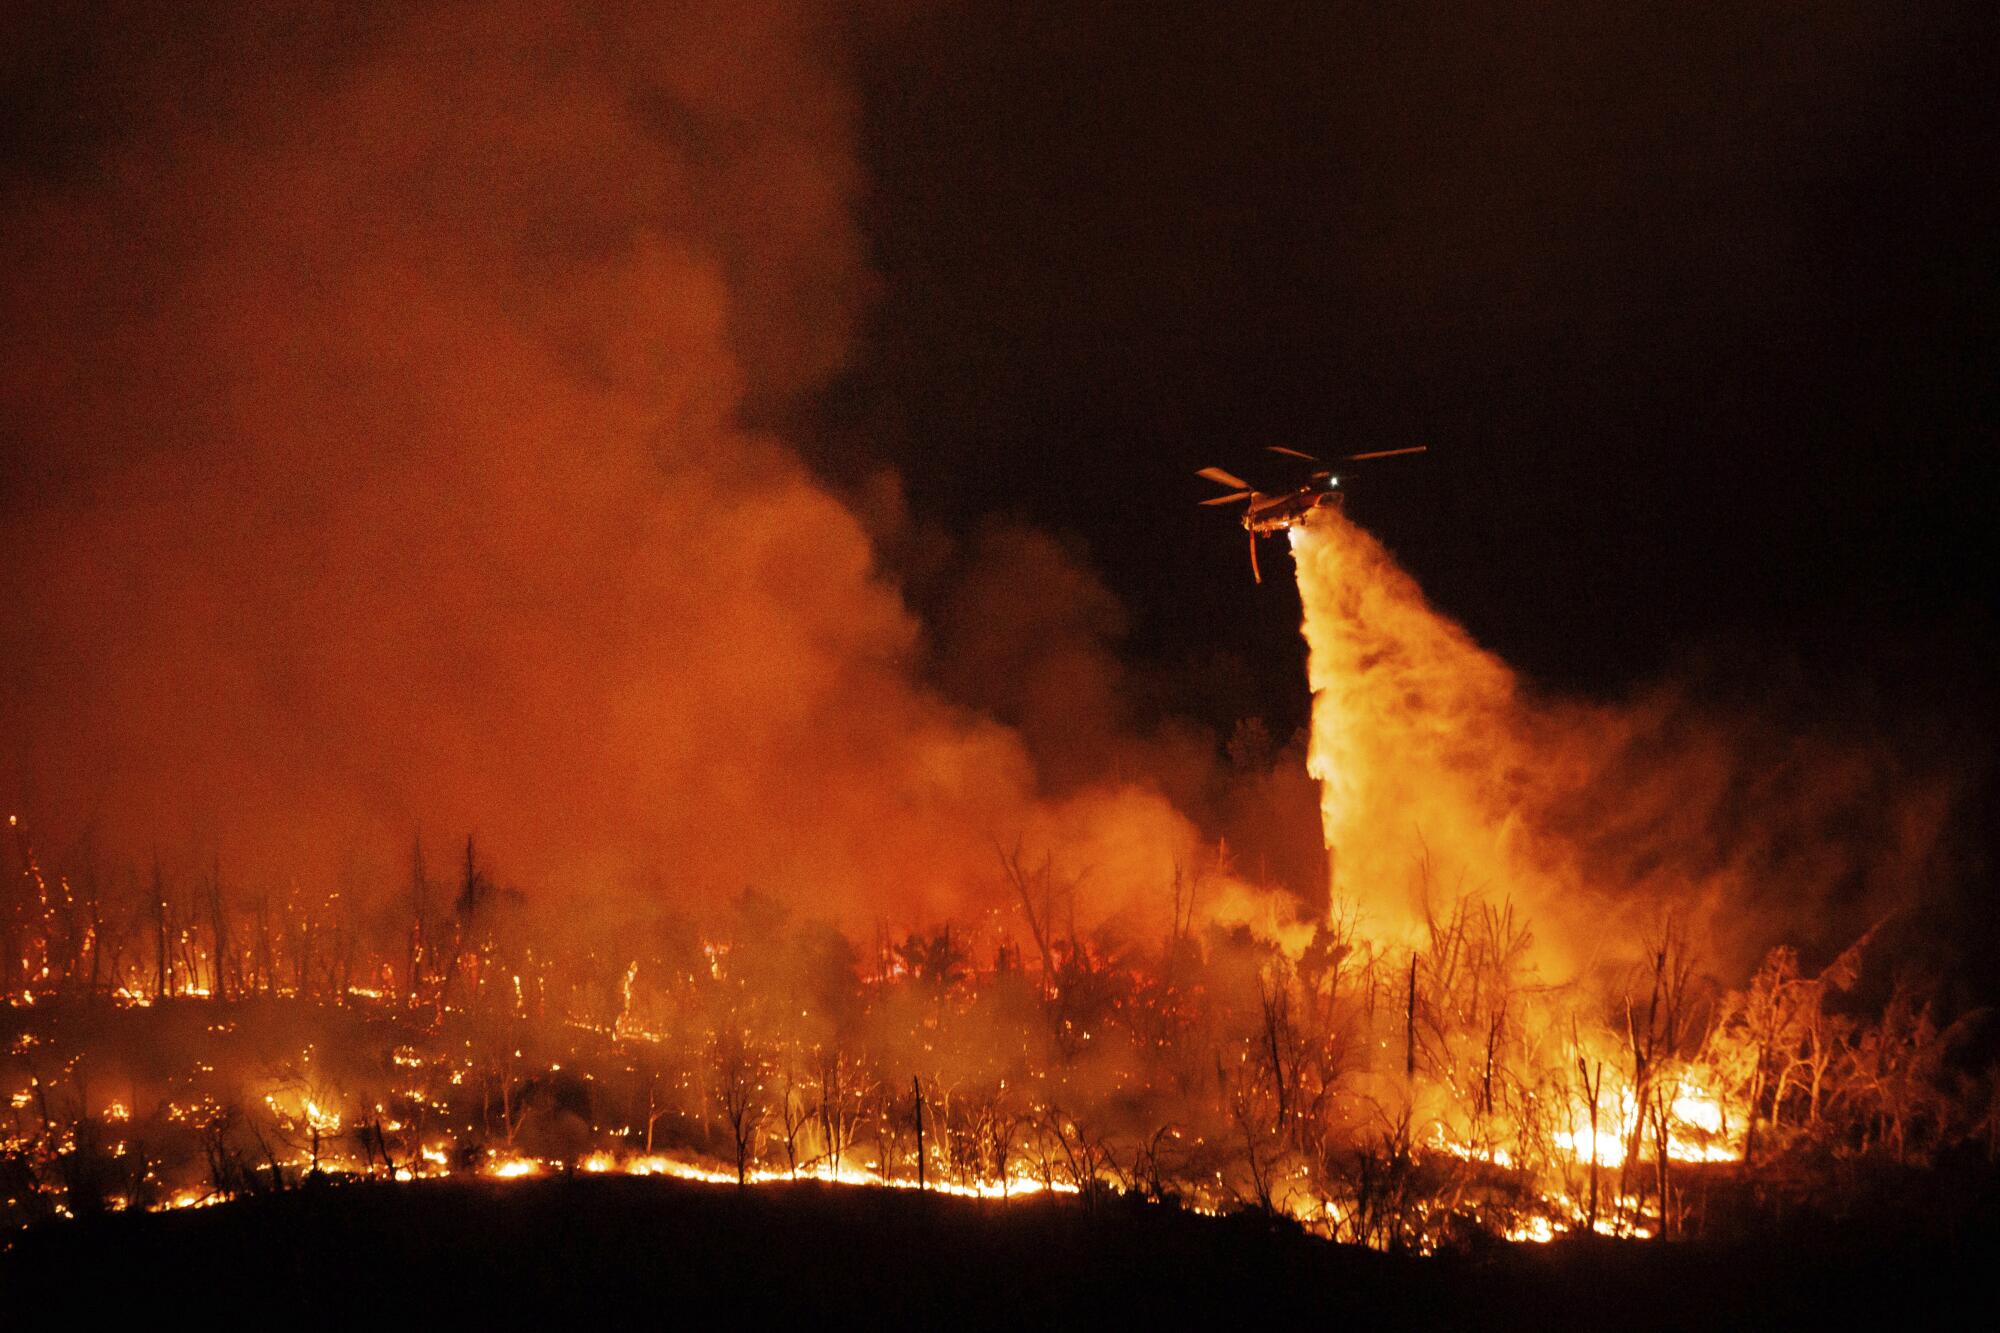 A helicopter drops water on flames at night.